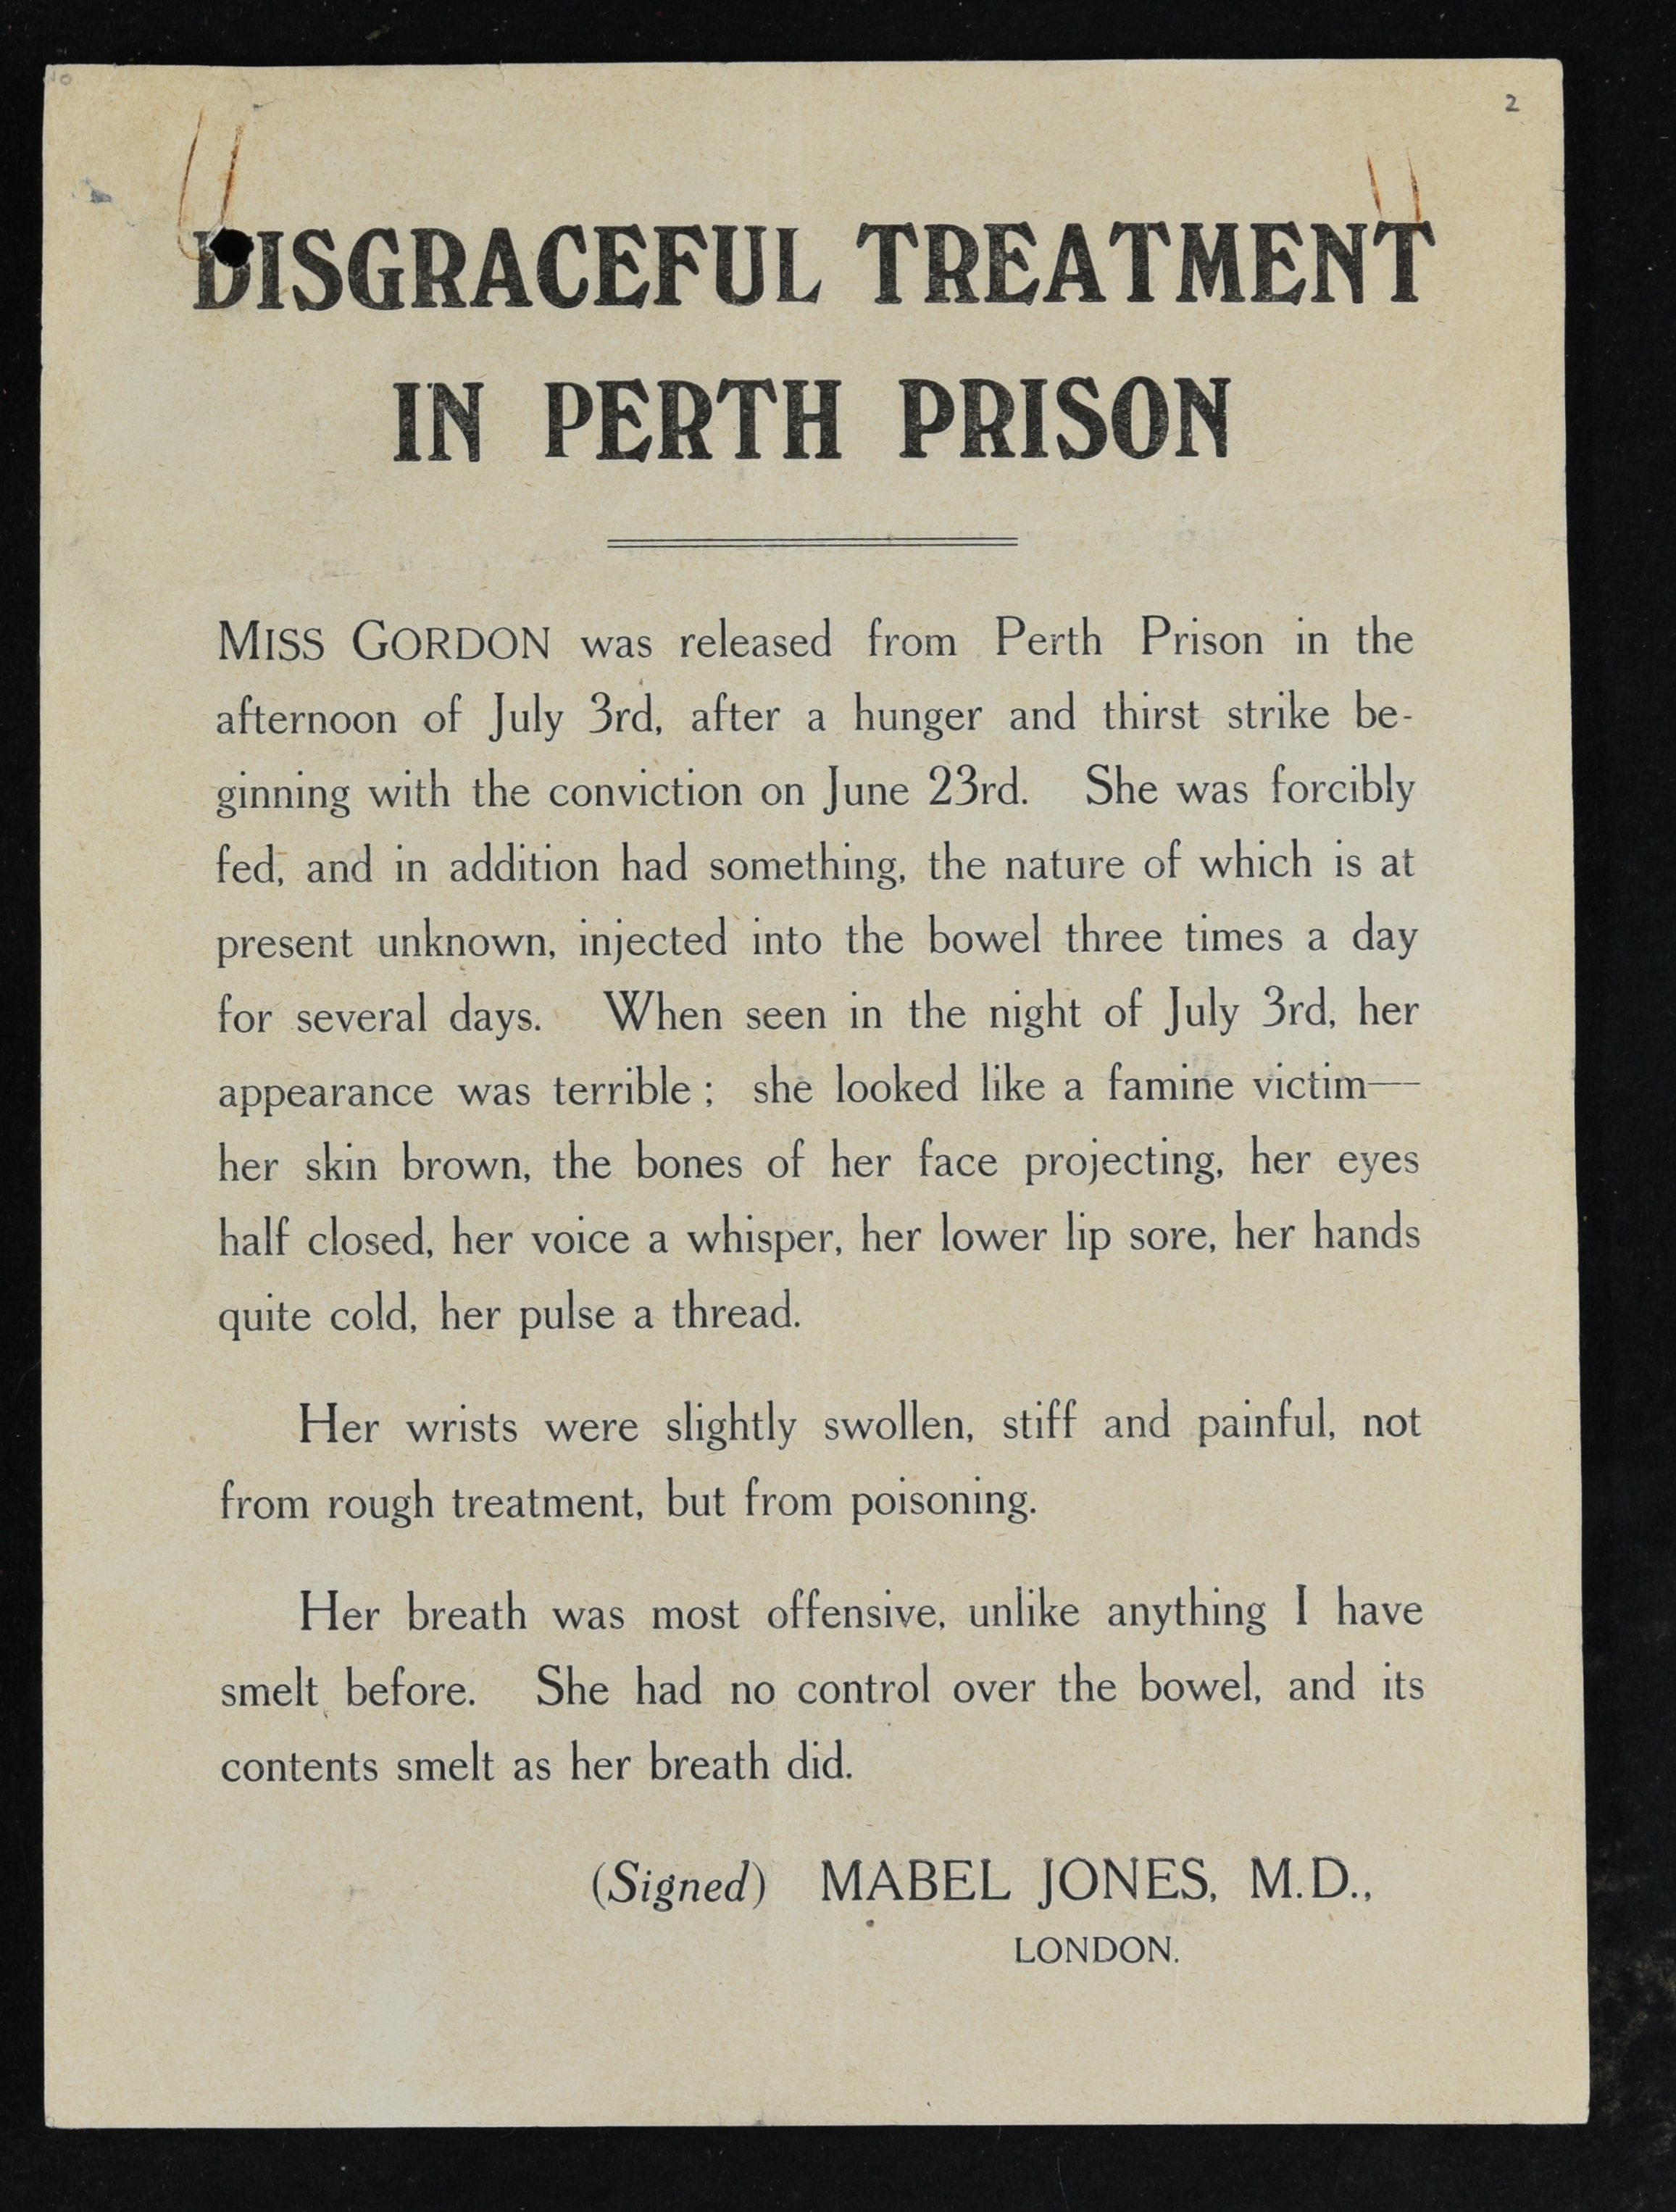 Leaflet titled 'Disgraceful Treatment in Perth Prison'. Reports on the treatment of Frances Gordon 